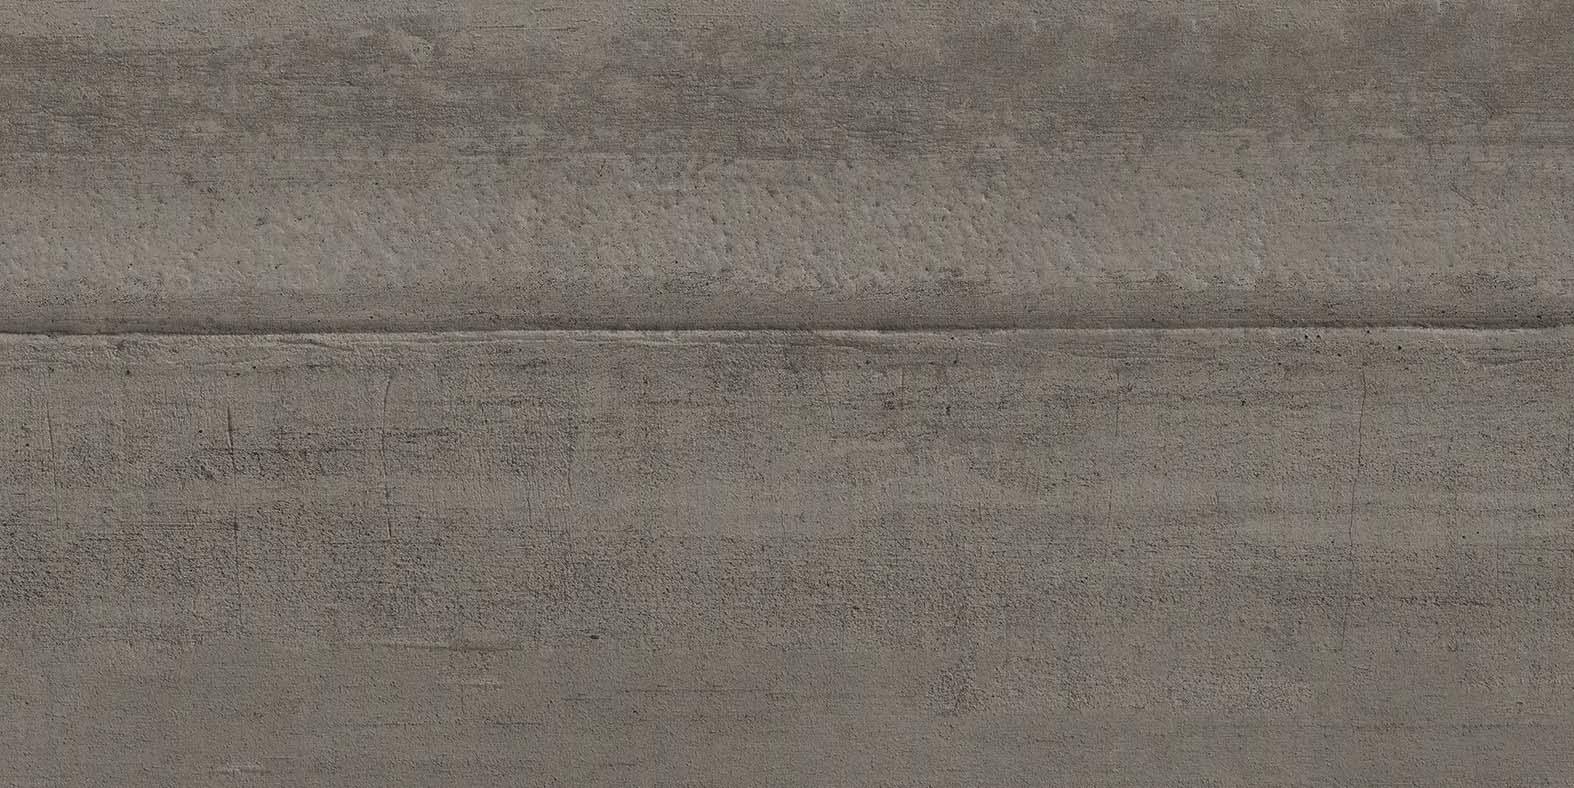 ABK Lab325 Form Taupe Nat 20x40